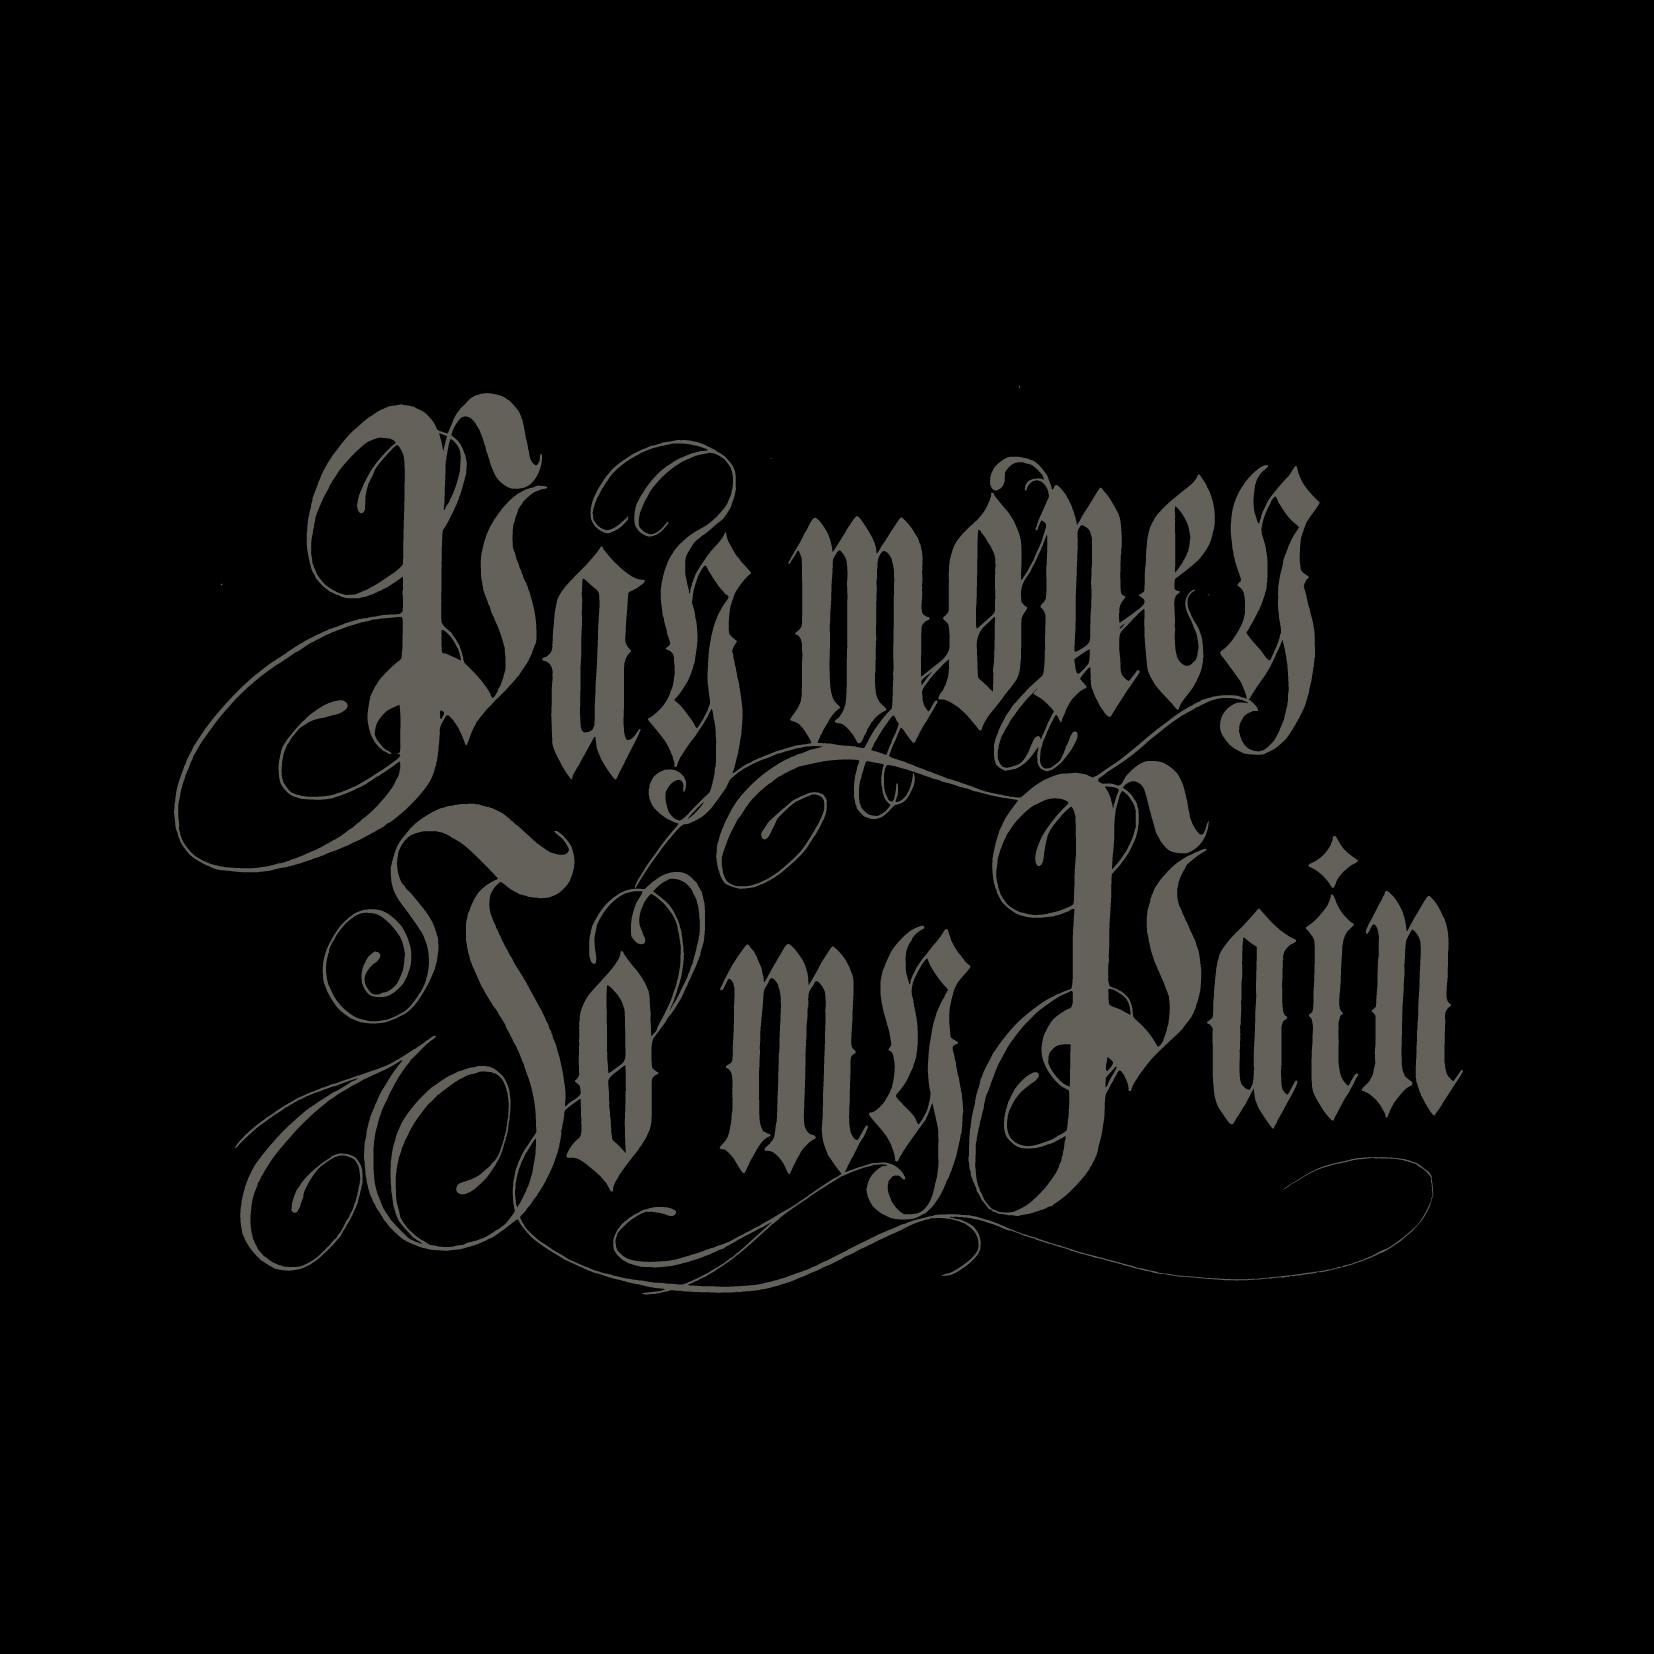 Pay money To my Pain - Black sheep